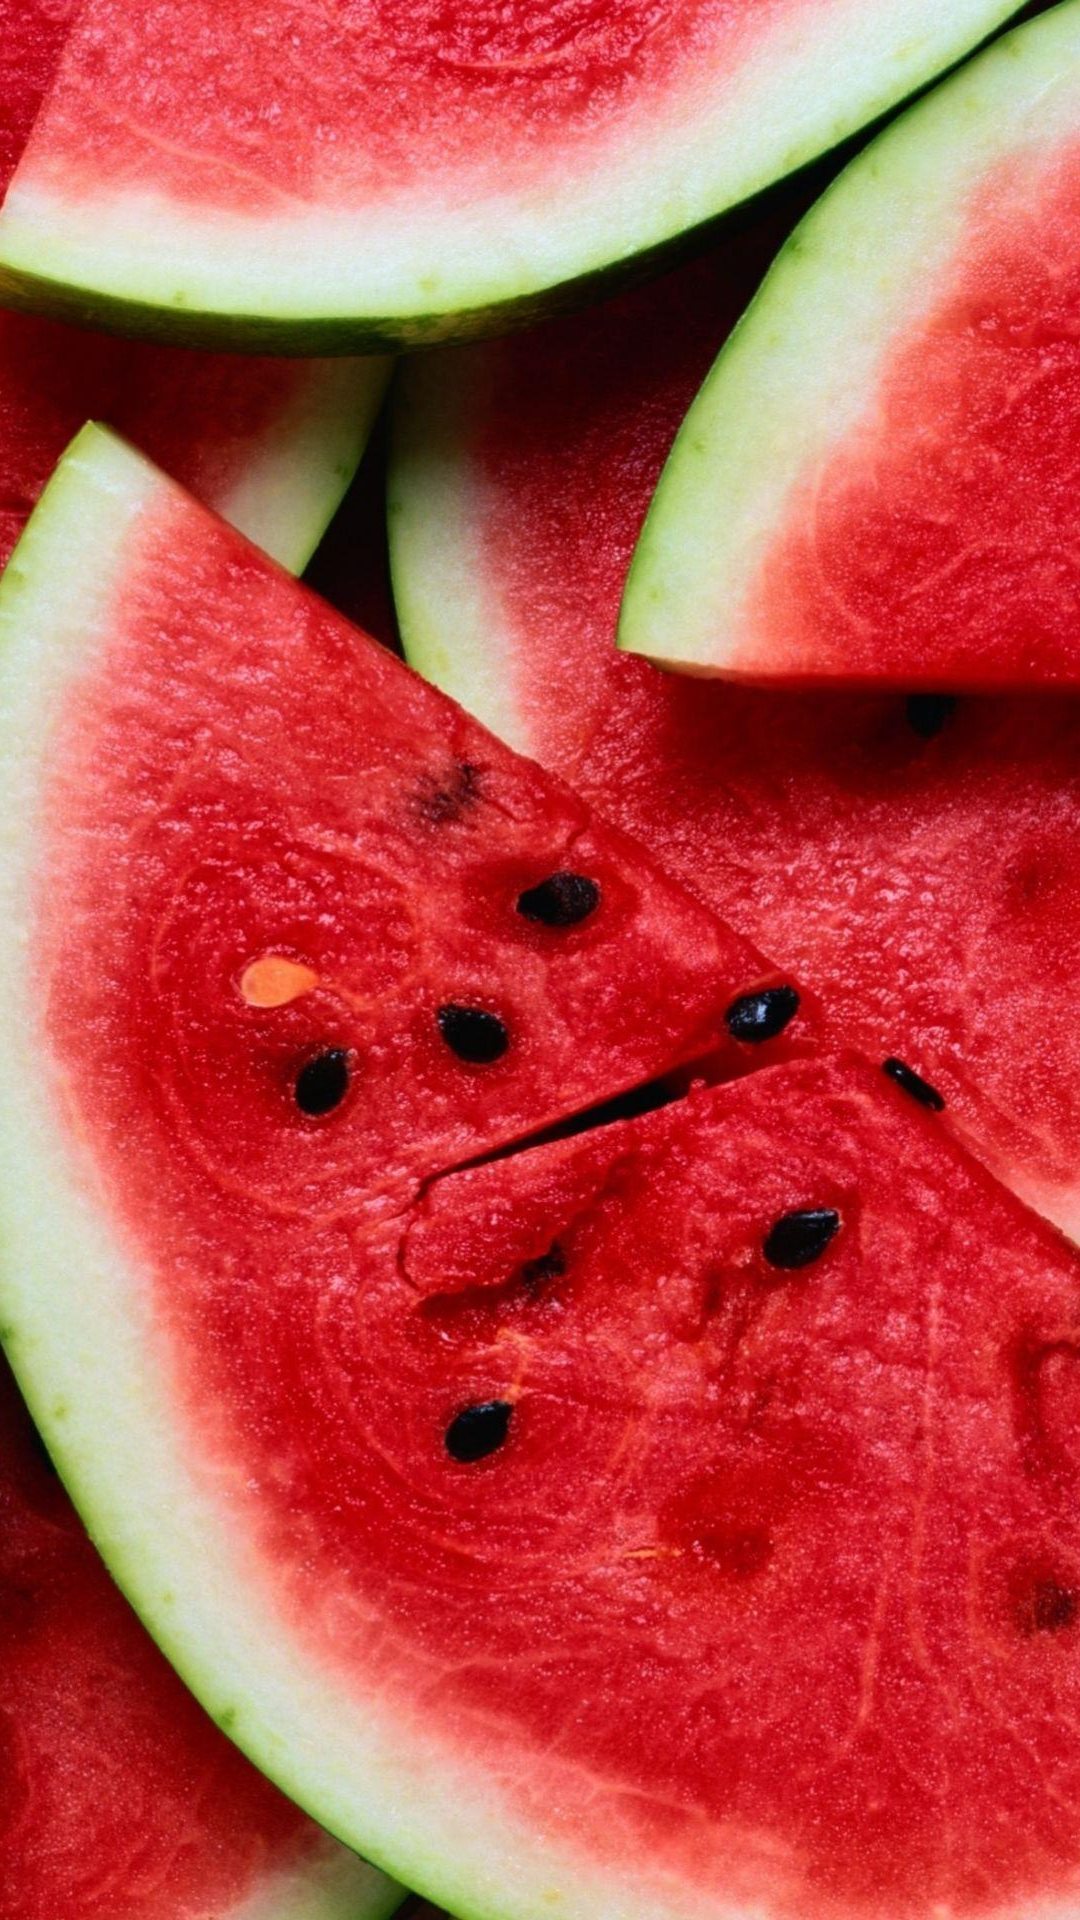 Watermelon Pieces Lockscreen Android Wallpaper free download